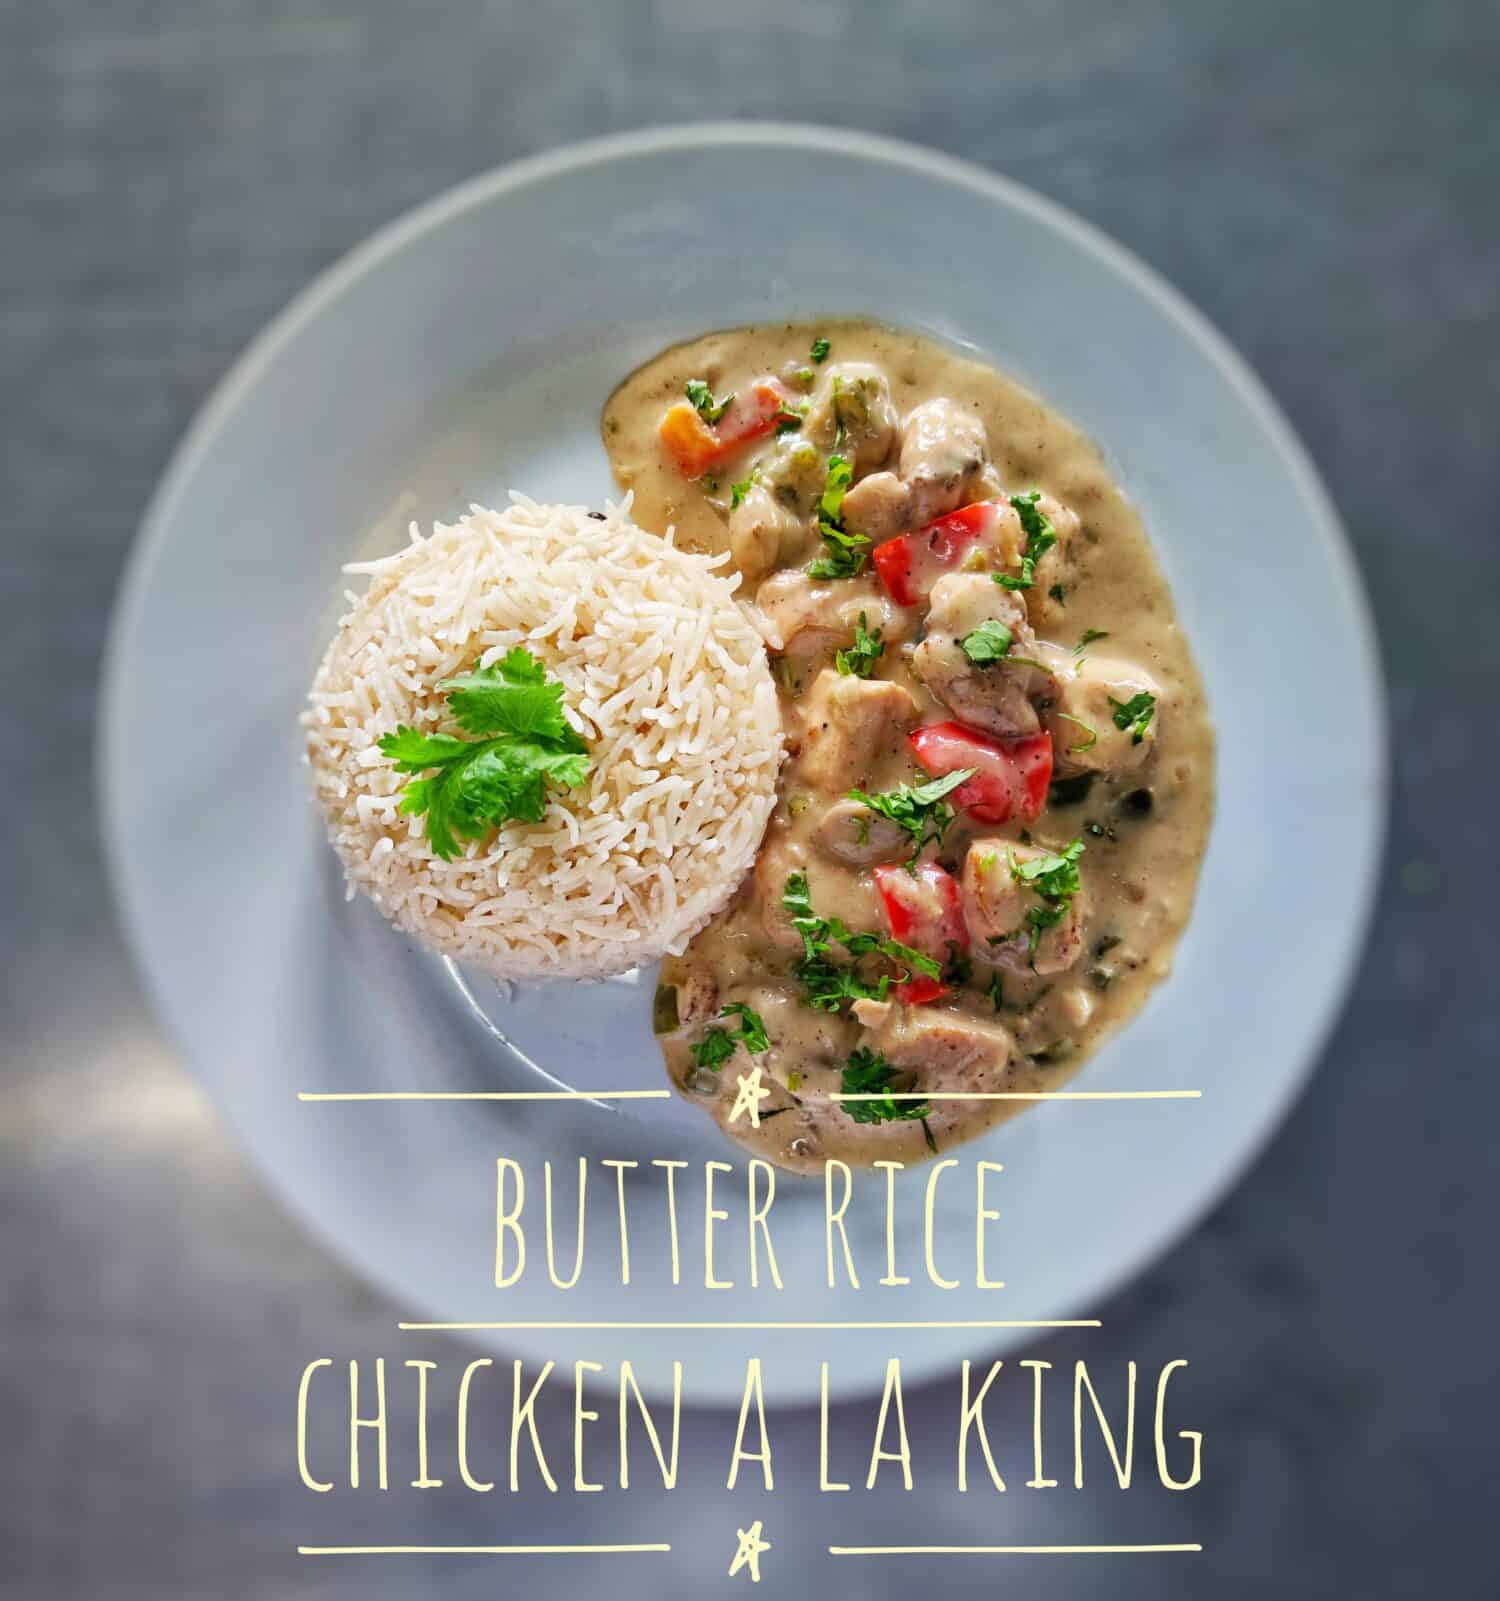 Chicken à la King ('chicken in the style of King') is a dish consisting of diced chicken in a cream sauce, often with sherry, mushrooms, and vegetables, generally served over rice, noodles, or bread.